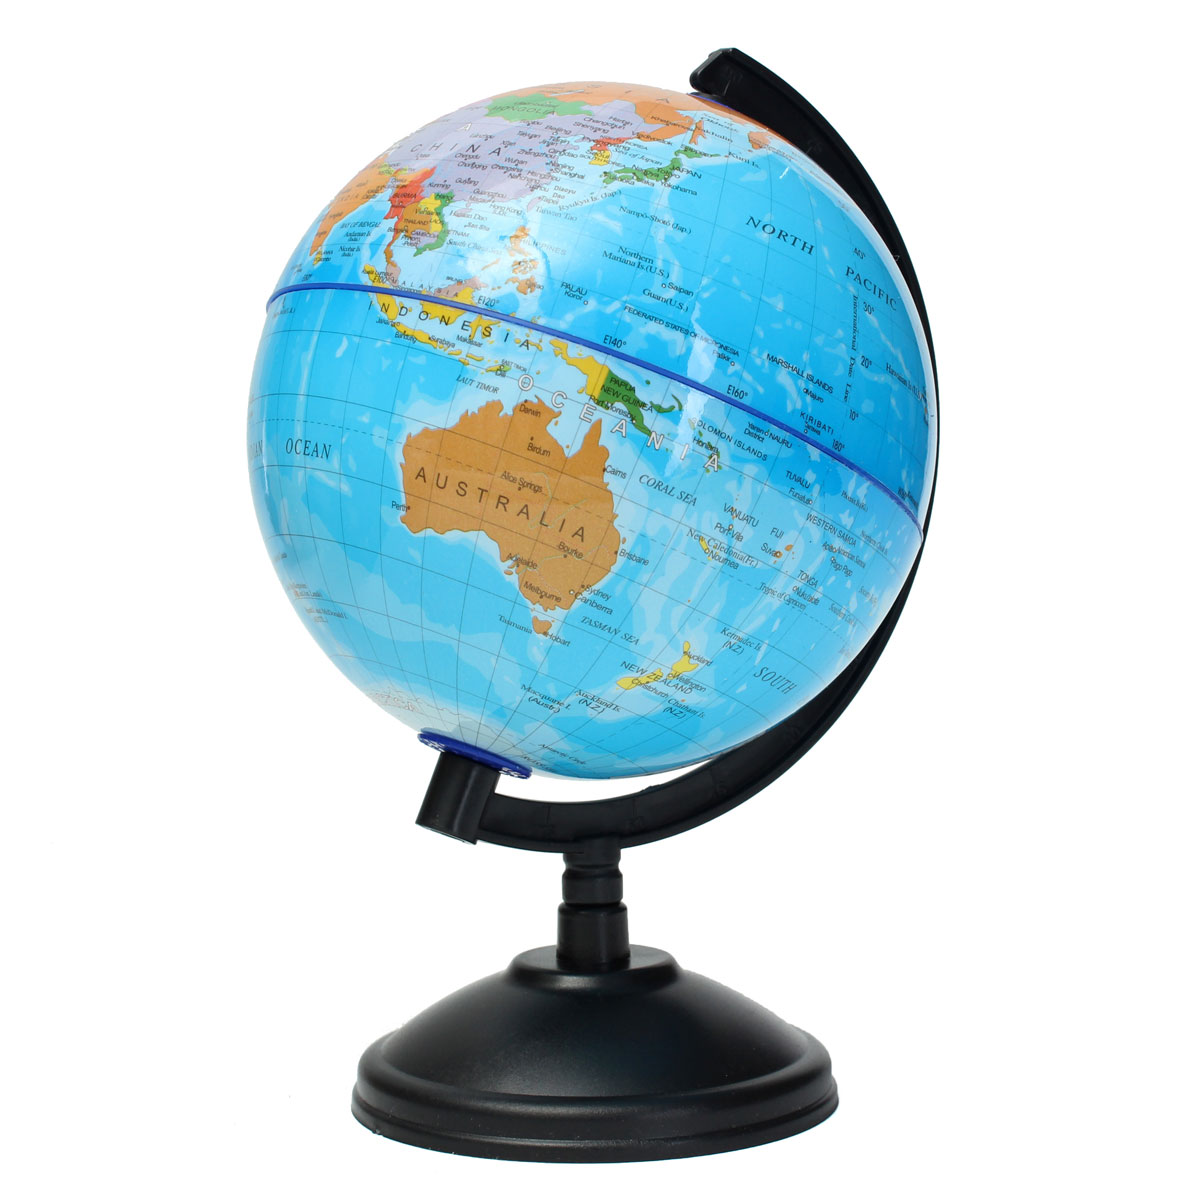 14cm-World-Globe-Atlas-Map-With-Swivel-Stand-Geography-Educational-Toy-Kids-Gift-1028037